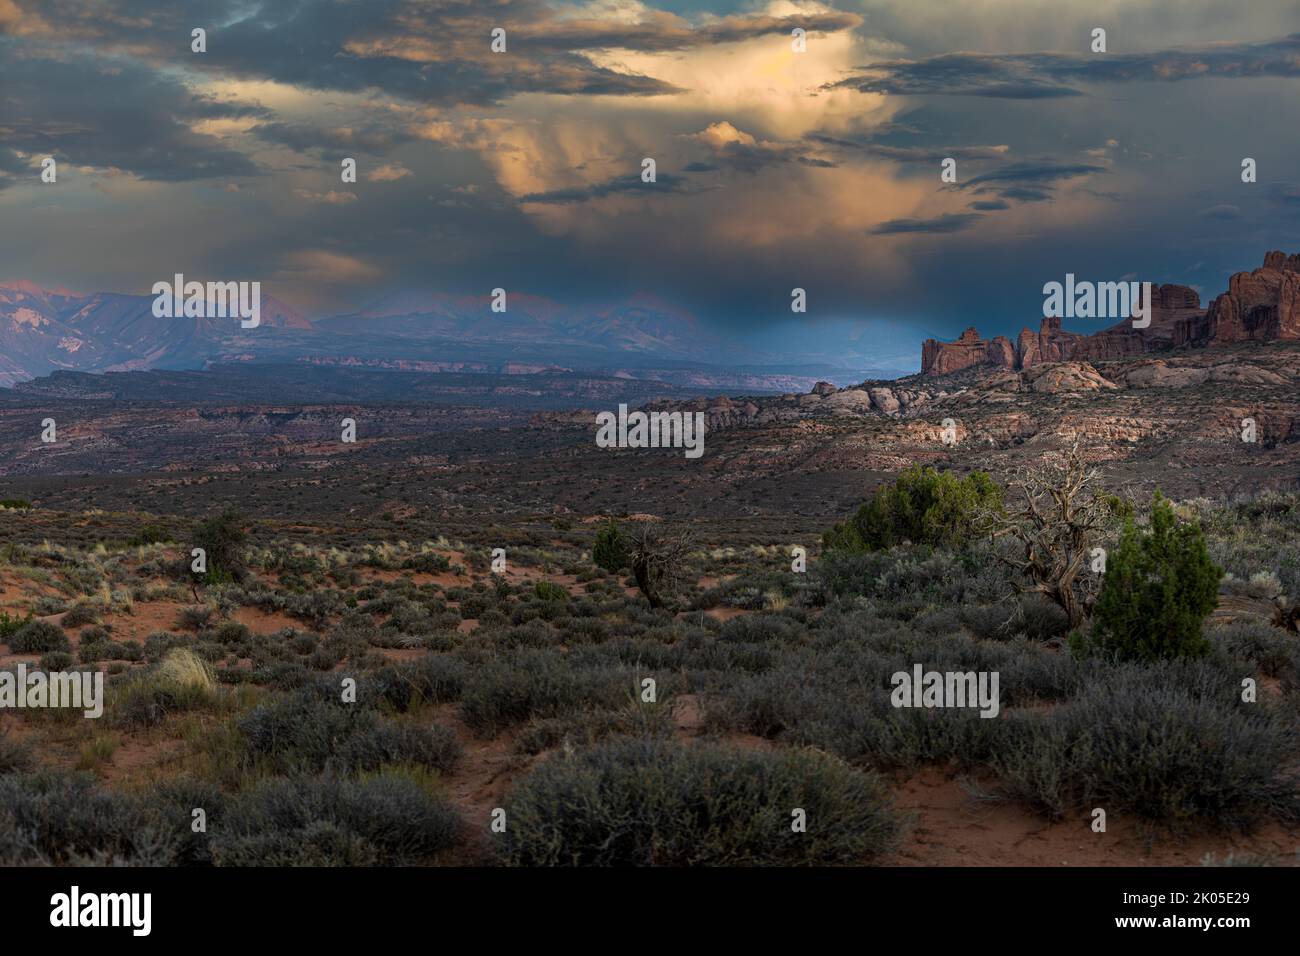 Rock formations in the distance. Stock Photo